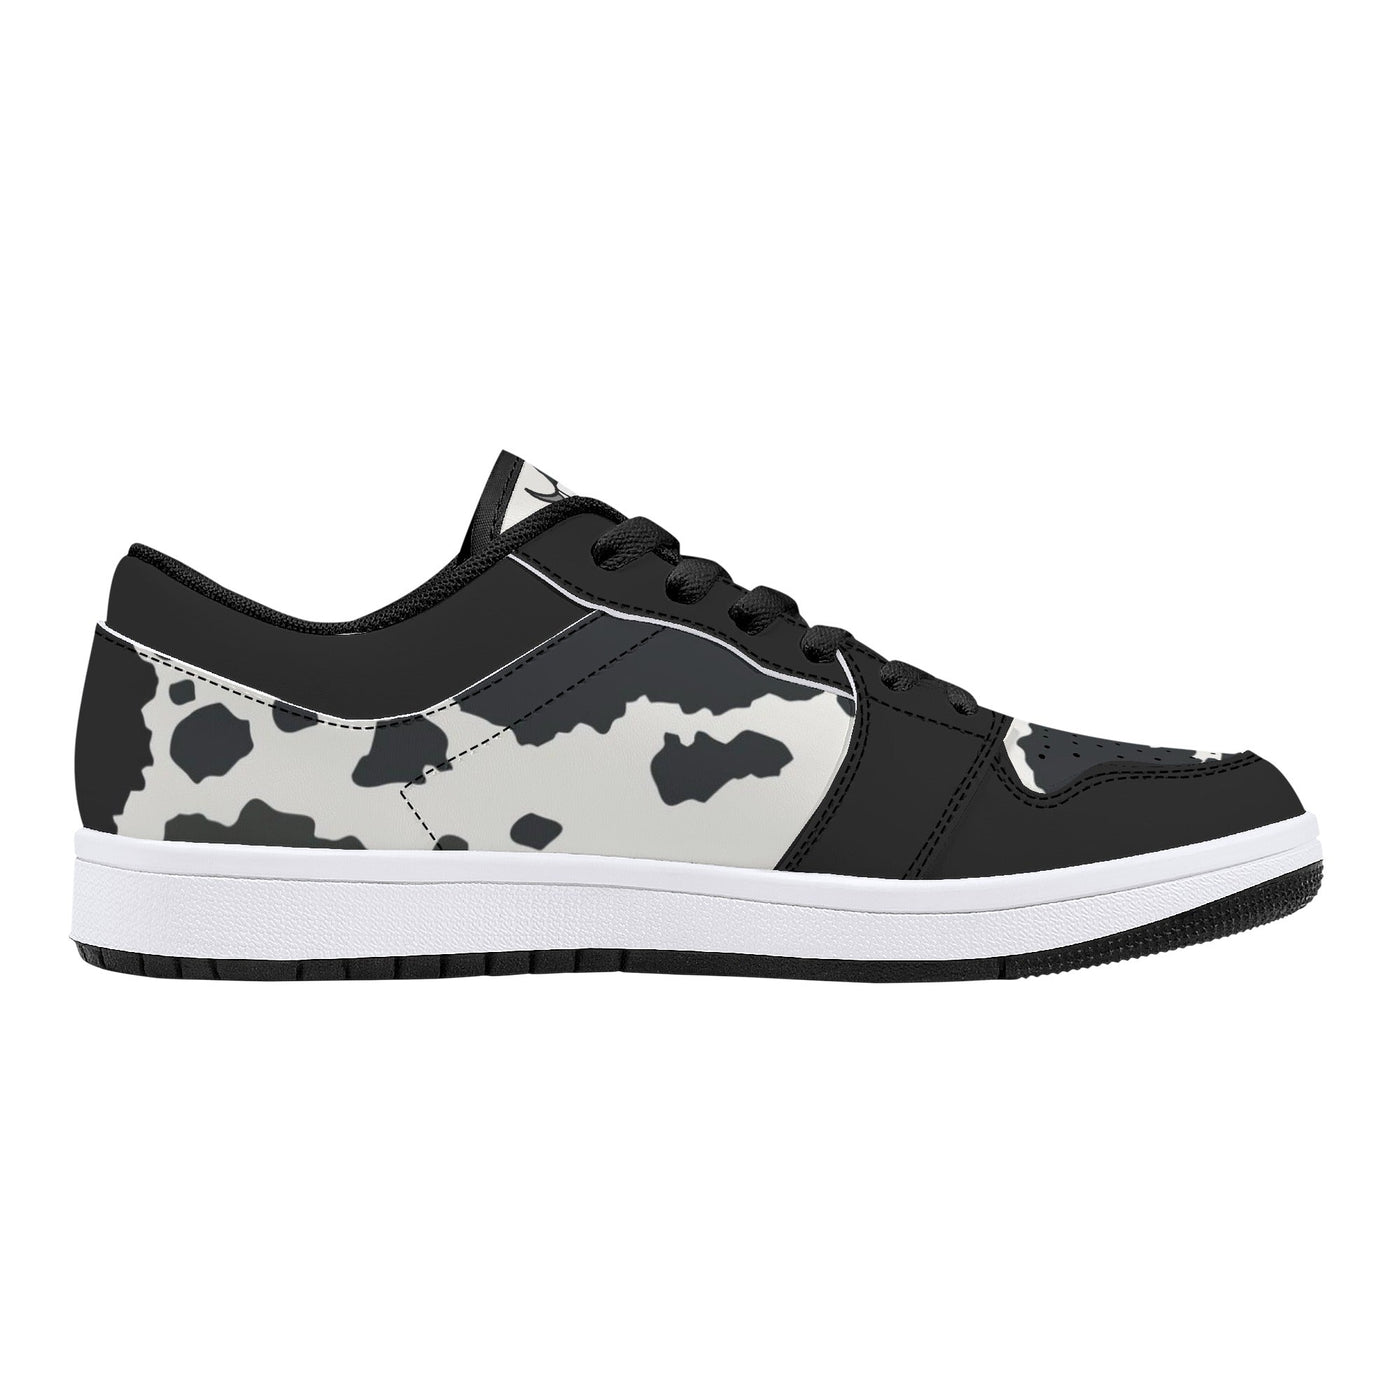 Moo-licious Cow Print Sneakers Low top